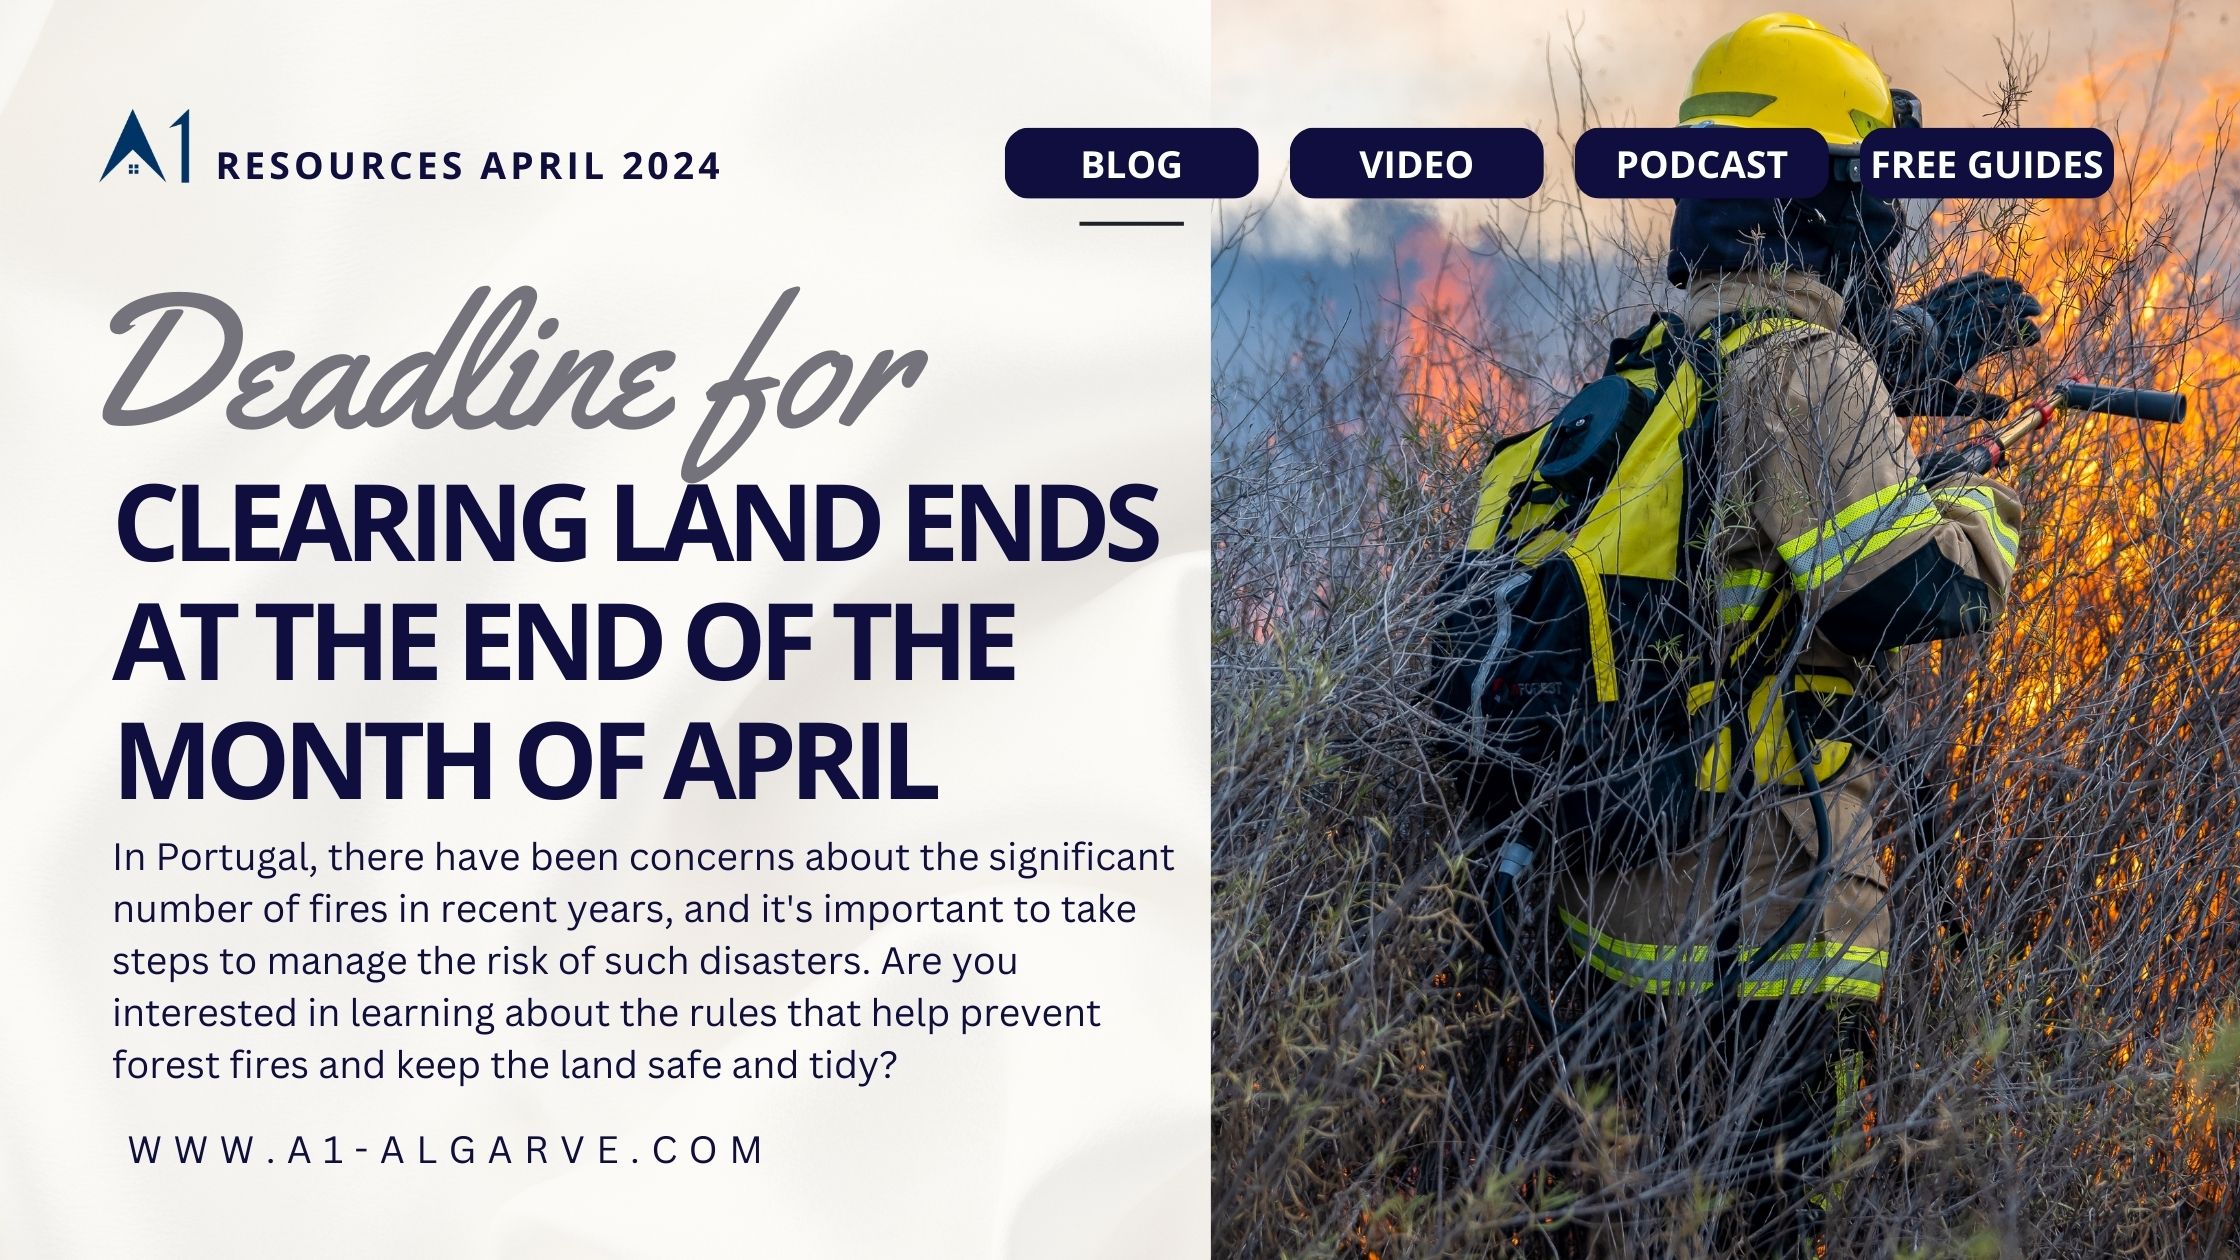 Deadline for clearing land ends at the end of the month of April